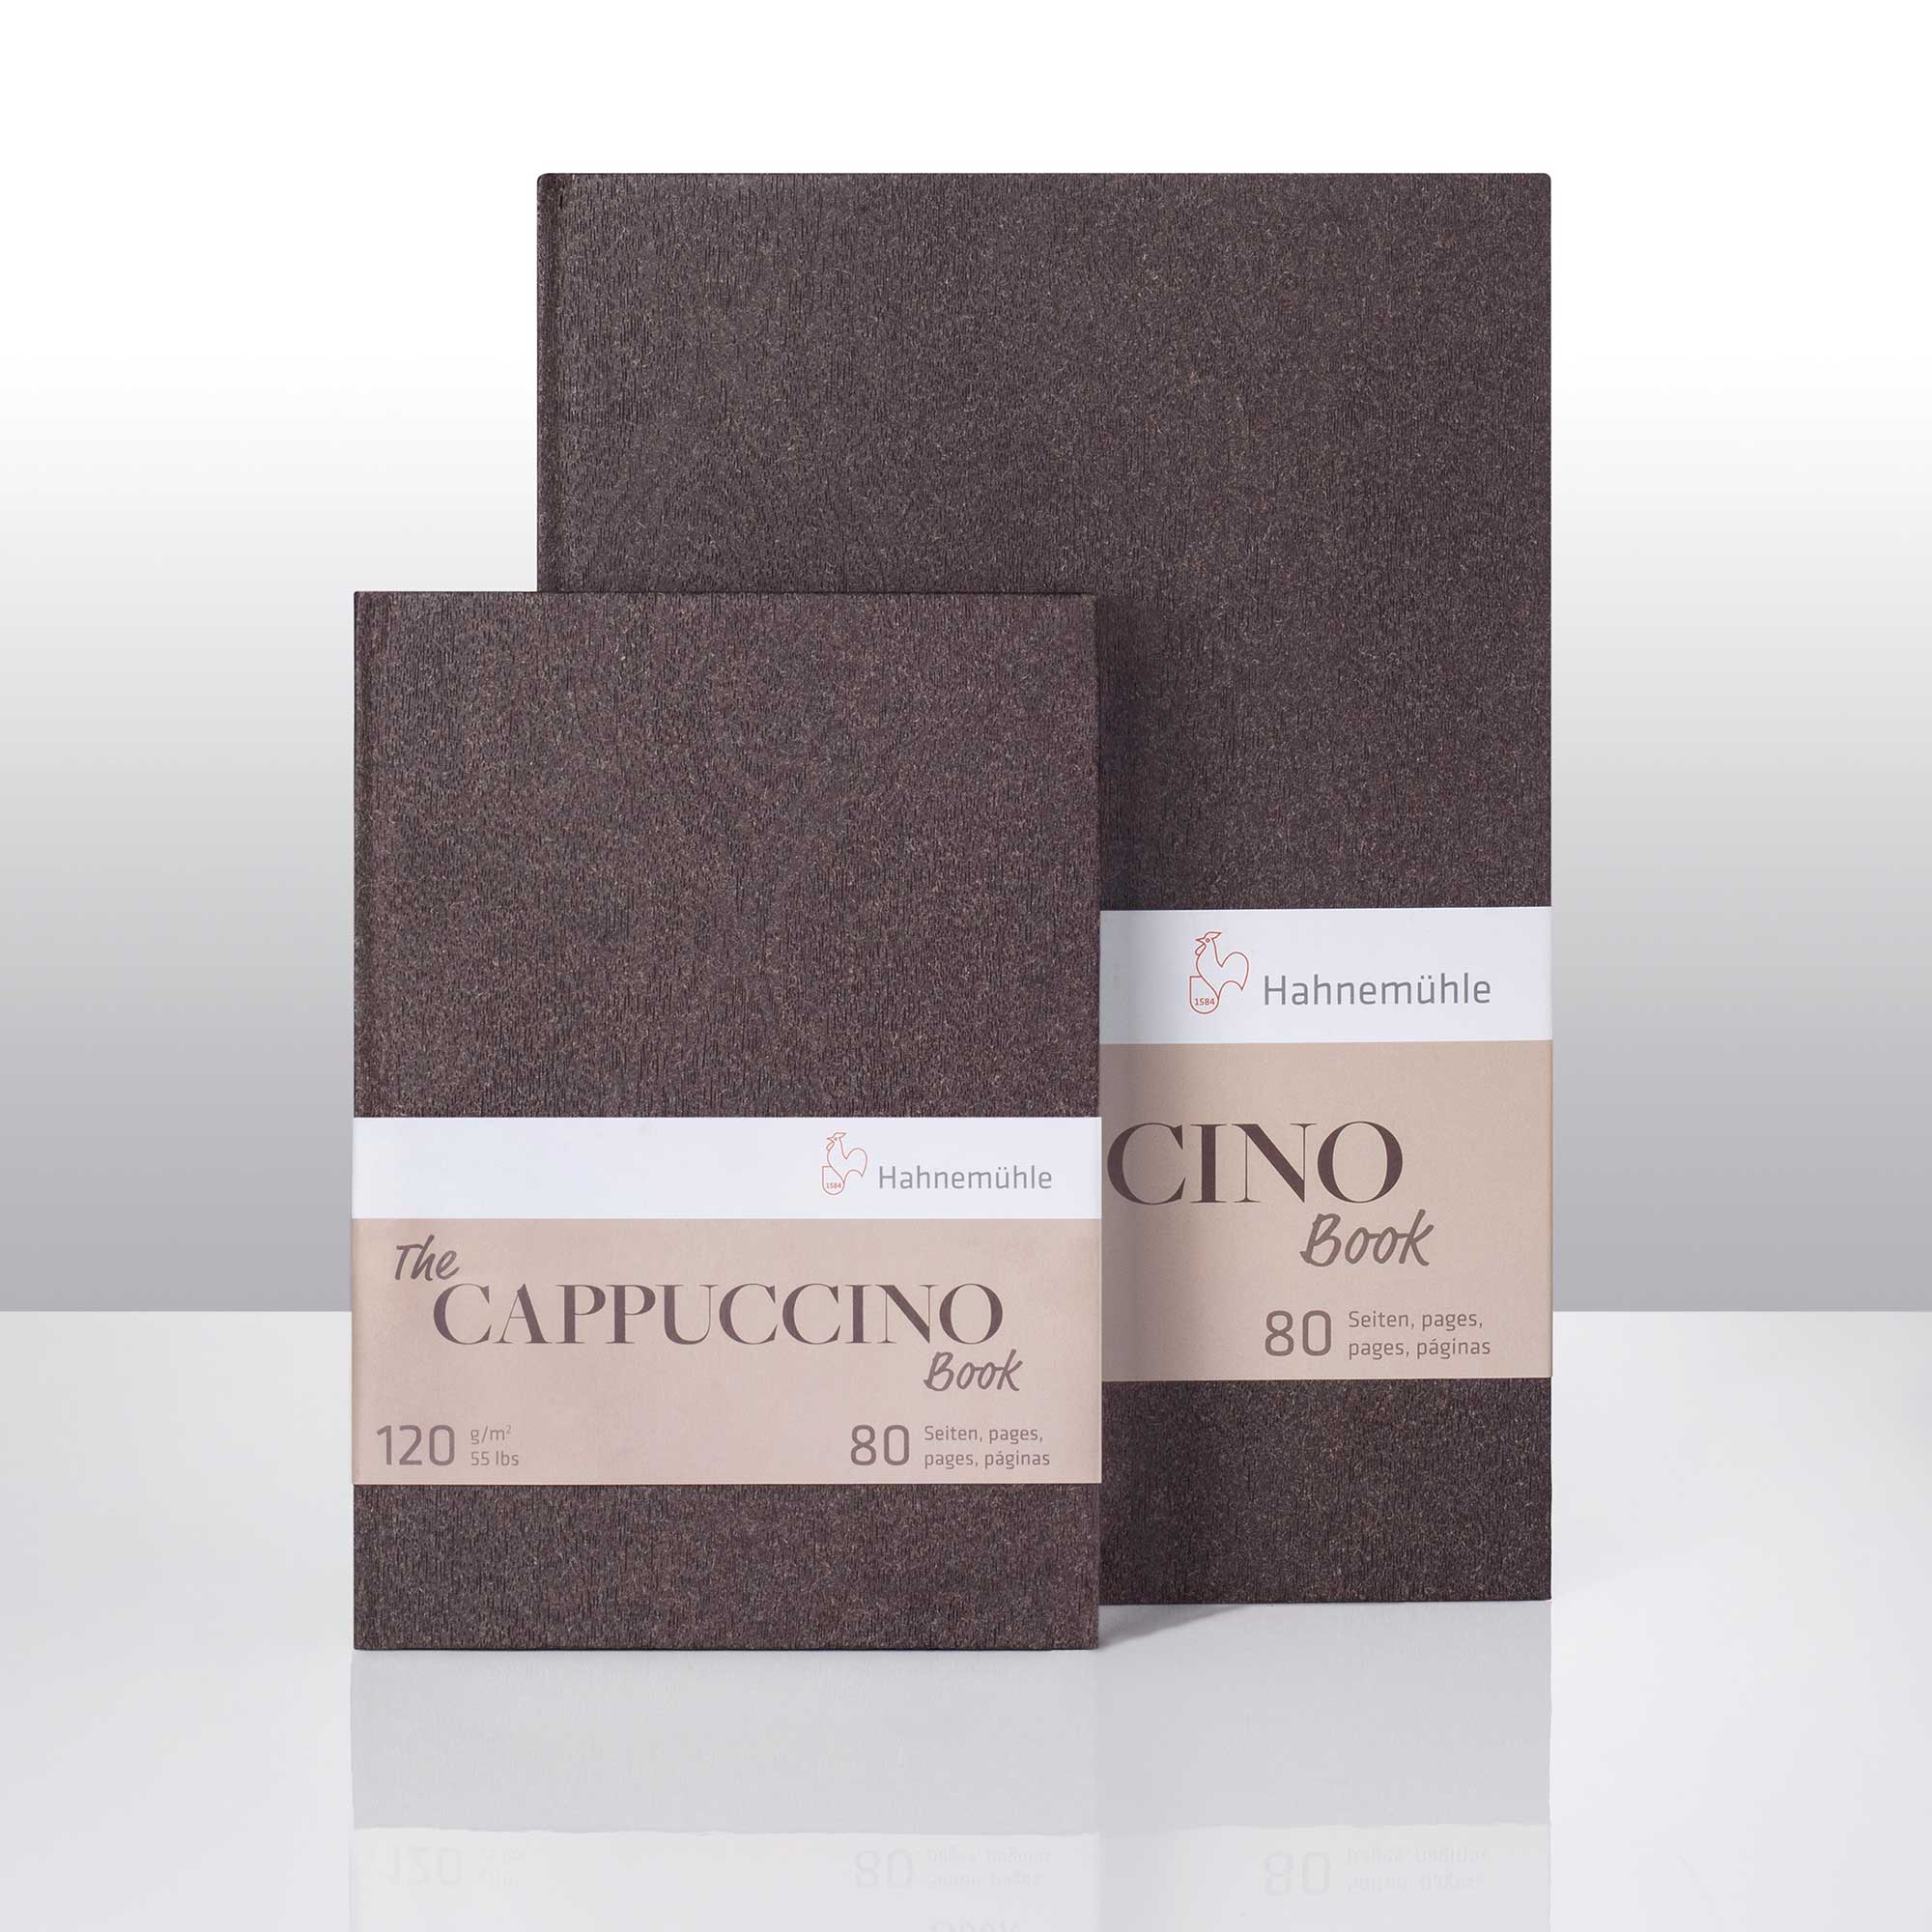 The Hahnemühle 'Cappuccino' Book - 120gsm - 80 Pages